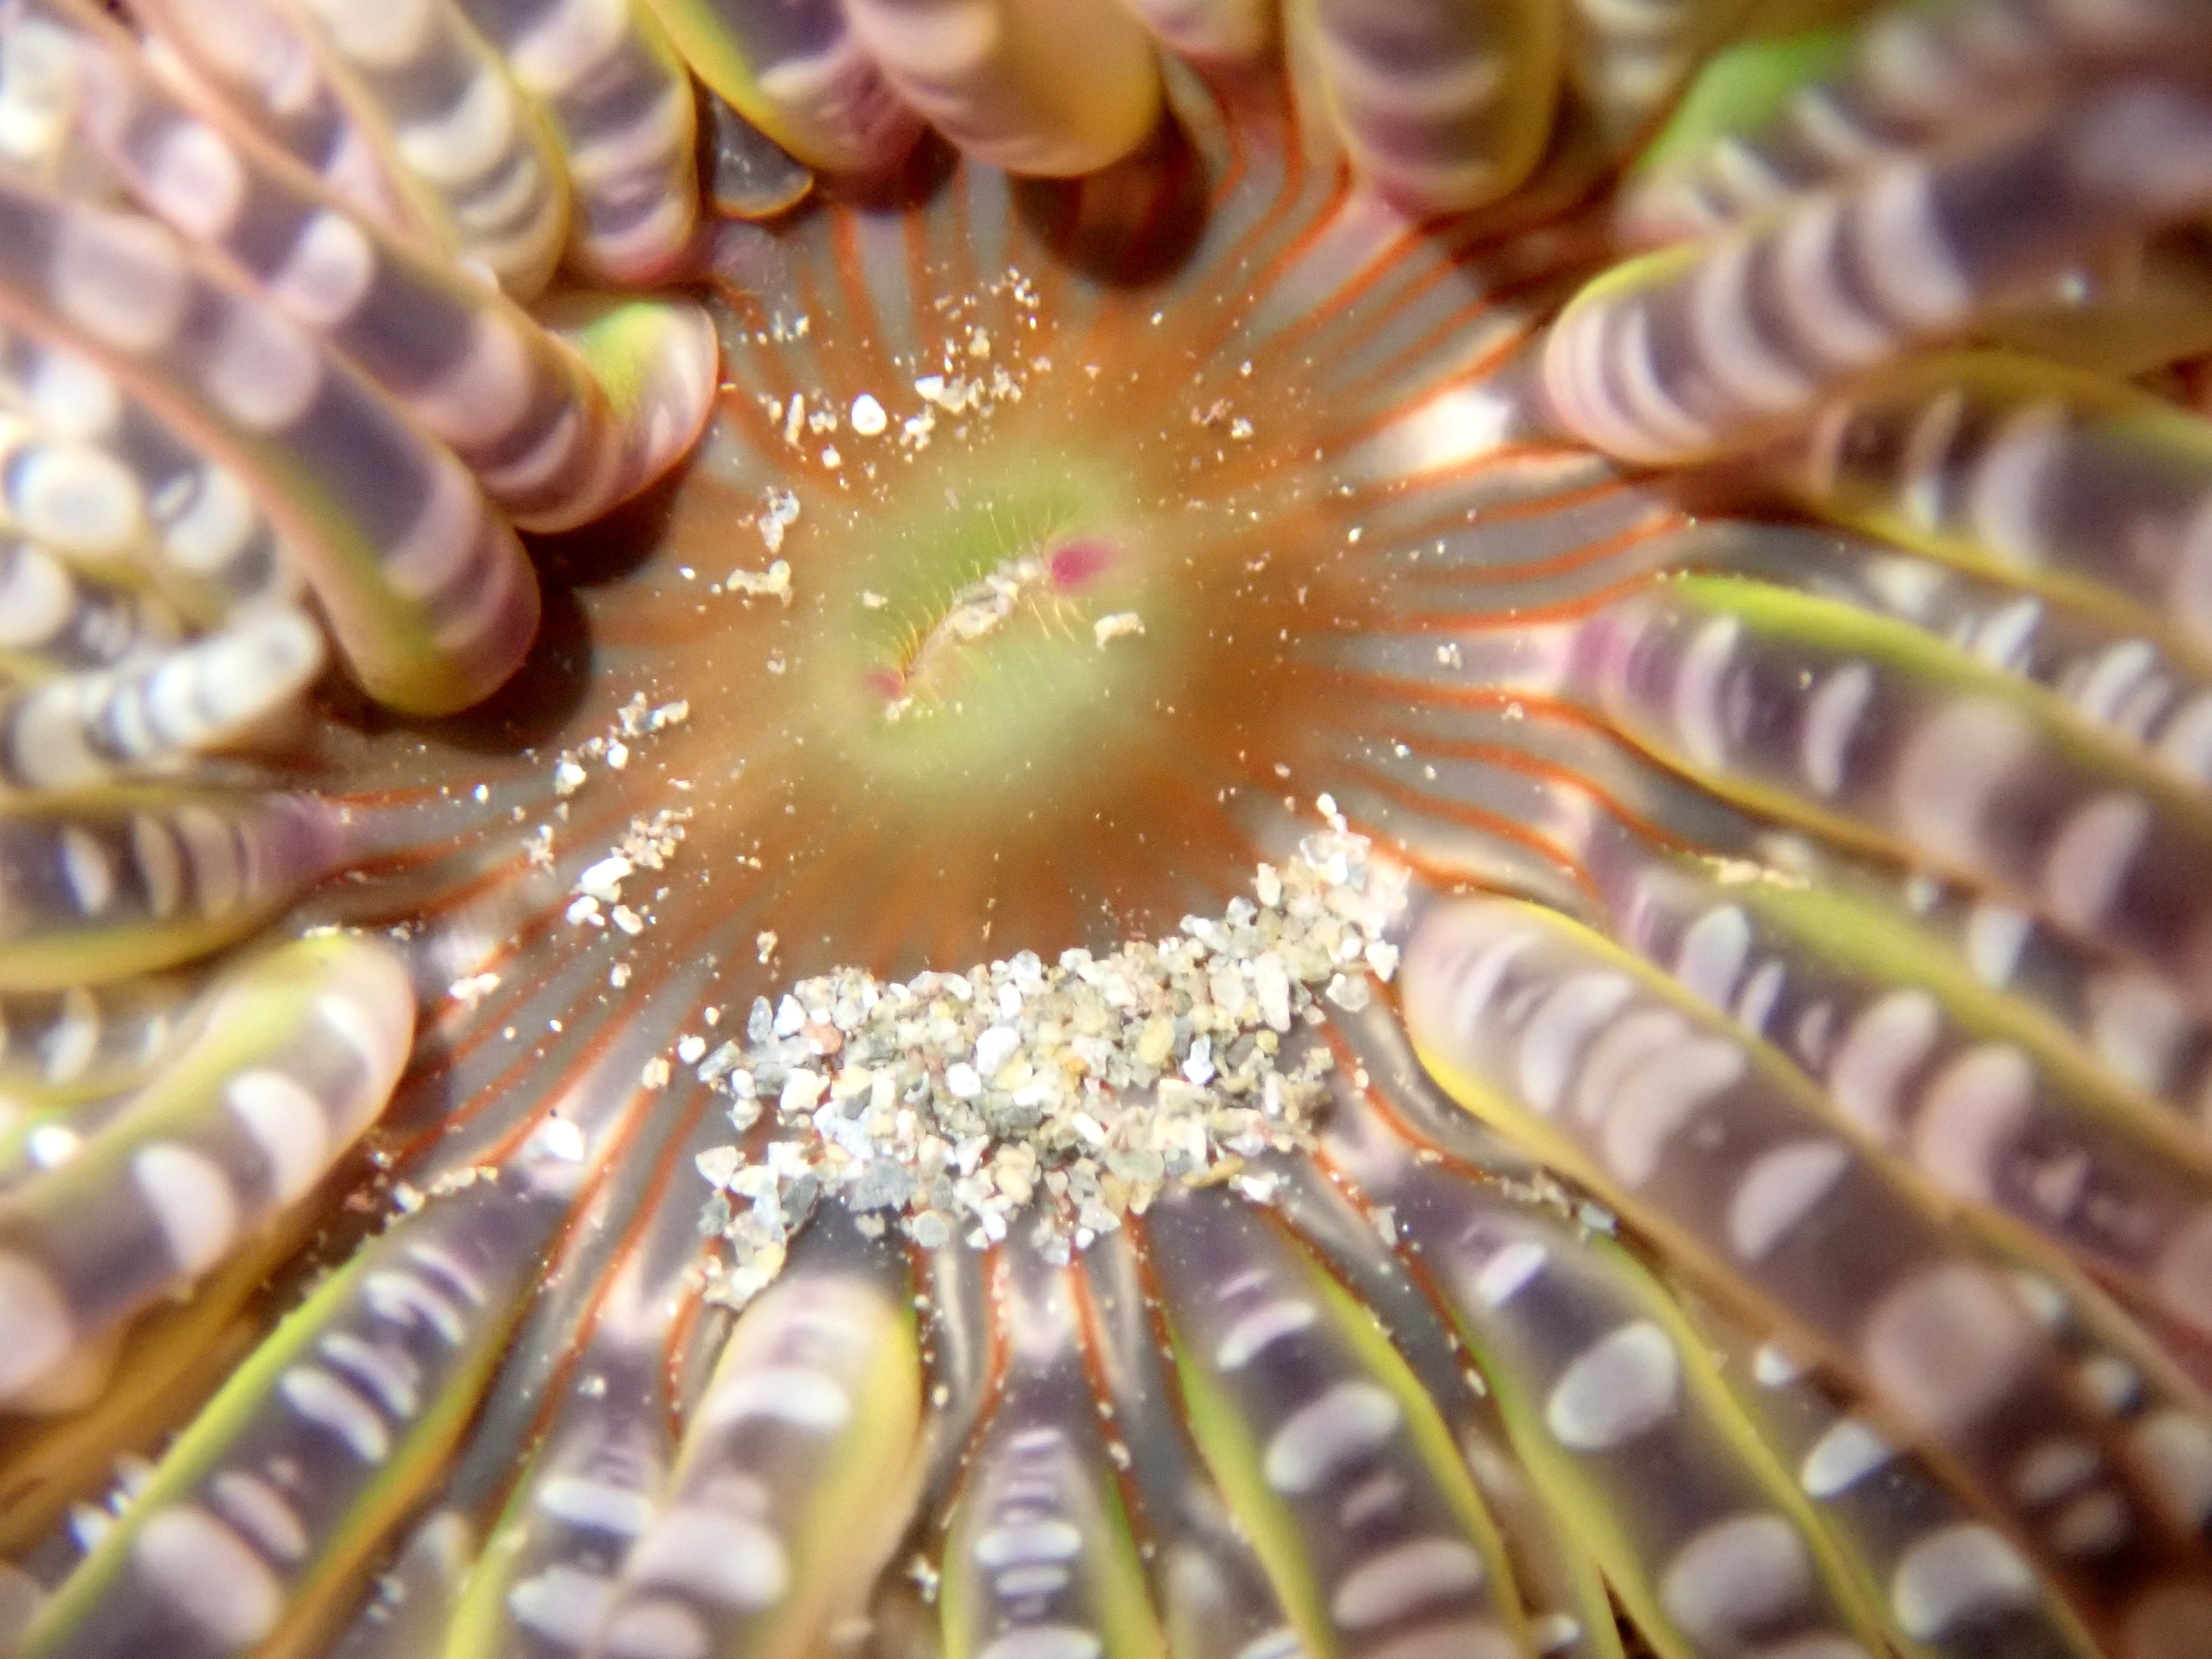 The mouth of the gem anemone